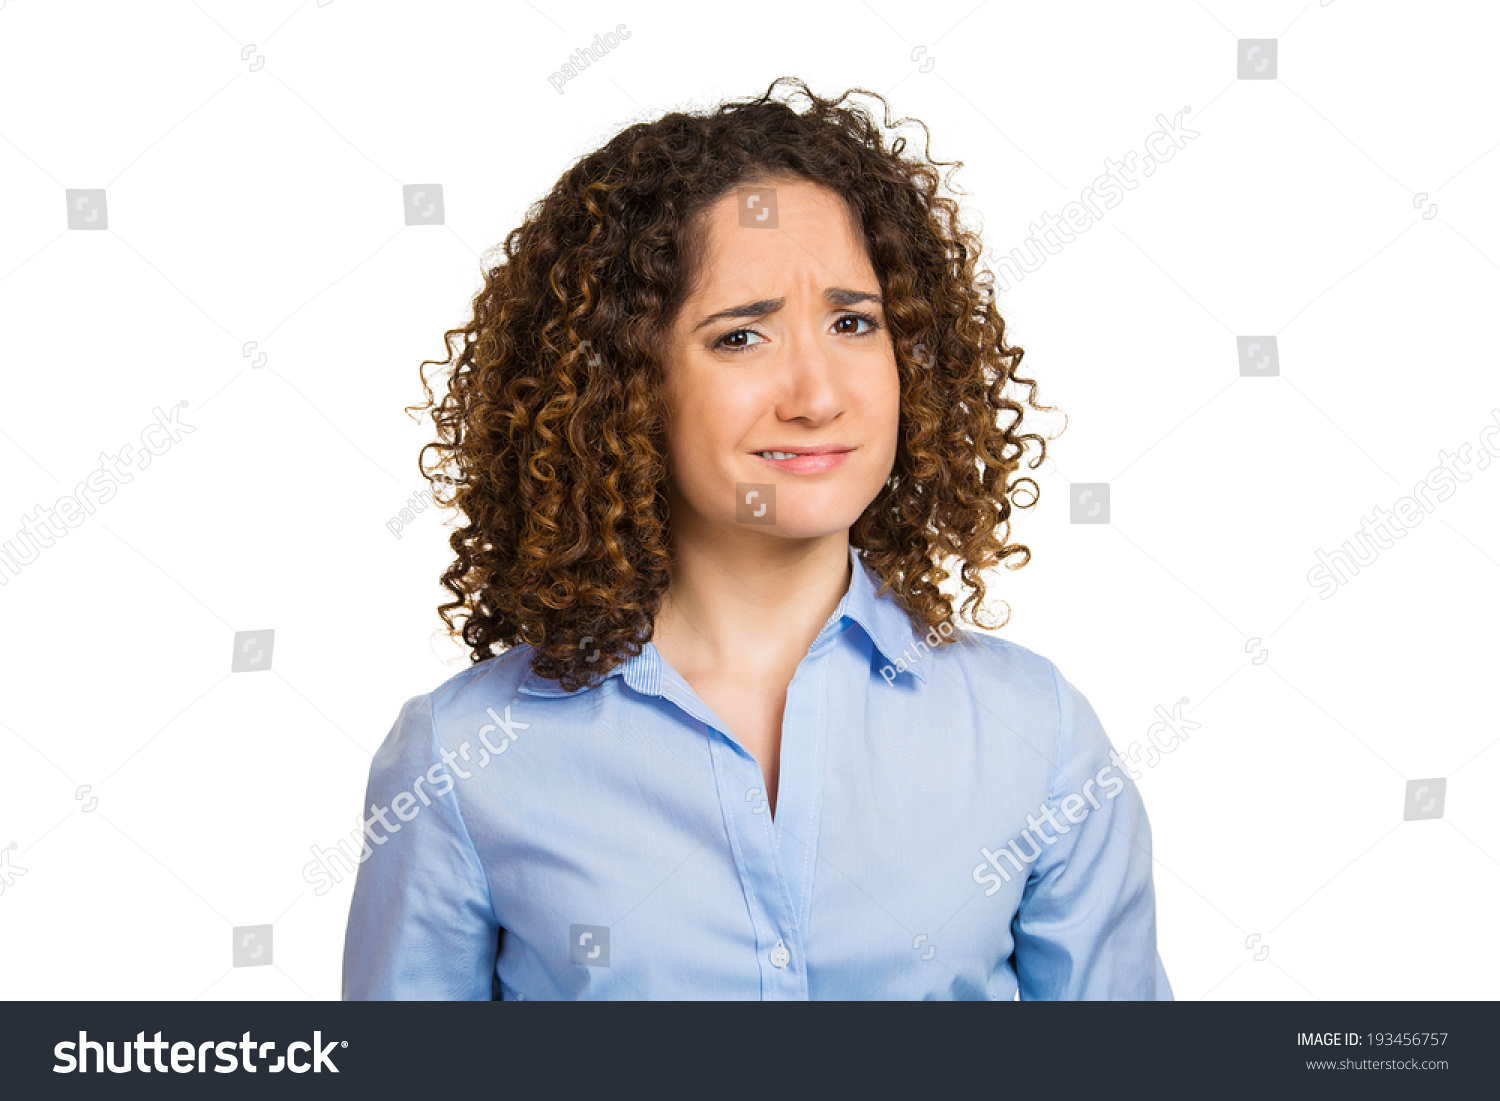 Closeup Portrait Skeptical Upset Young Woman Looking Suspicious Disgust On Face Mixed 4290